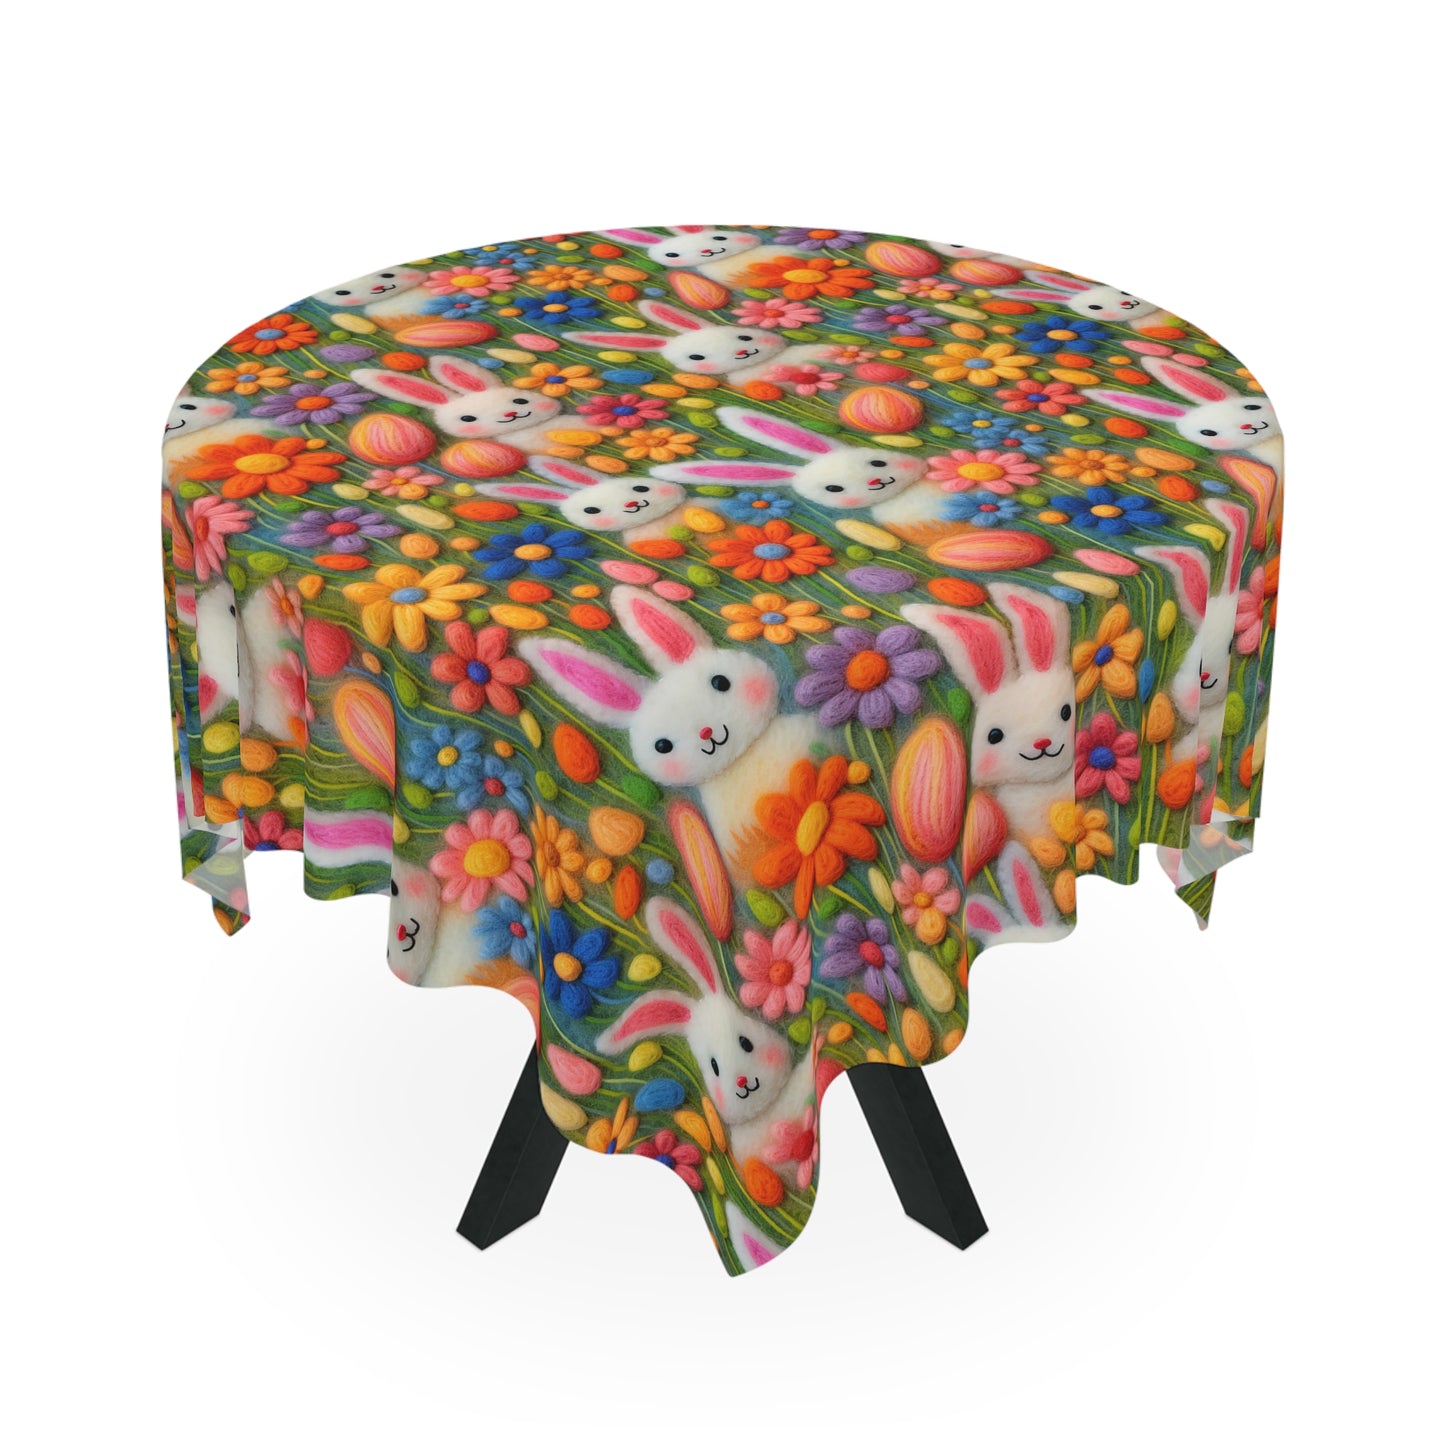 Bunnies and Flowers Tablecloth